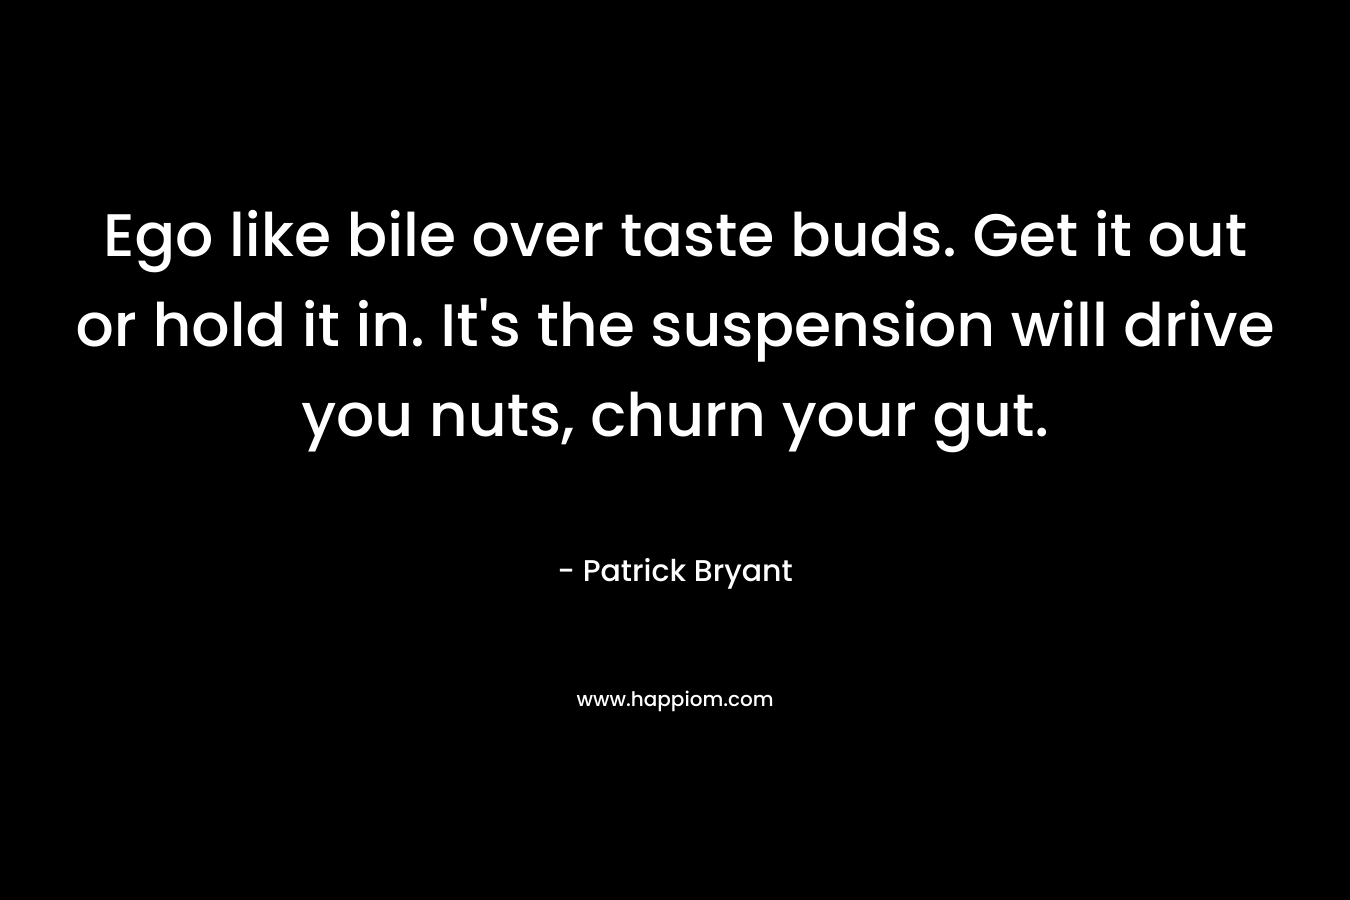 Ego like bile over taste buds. Get it out or hold it in. It’s the suspension will drive you nuts, churn your gut. – Patrick Bryant